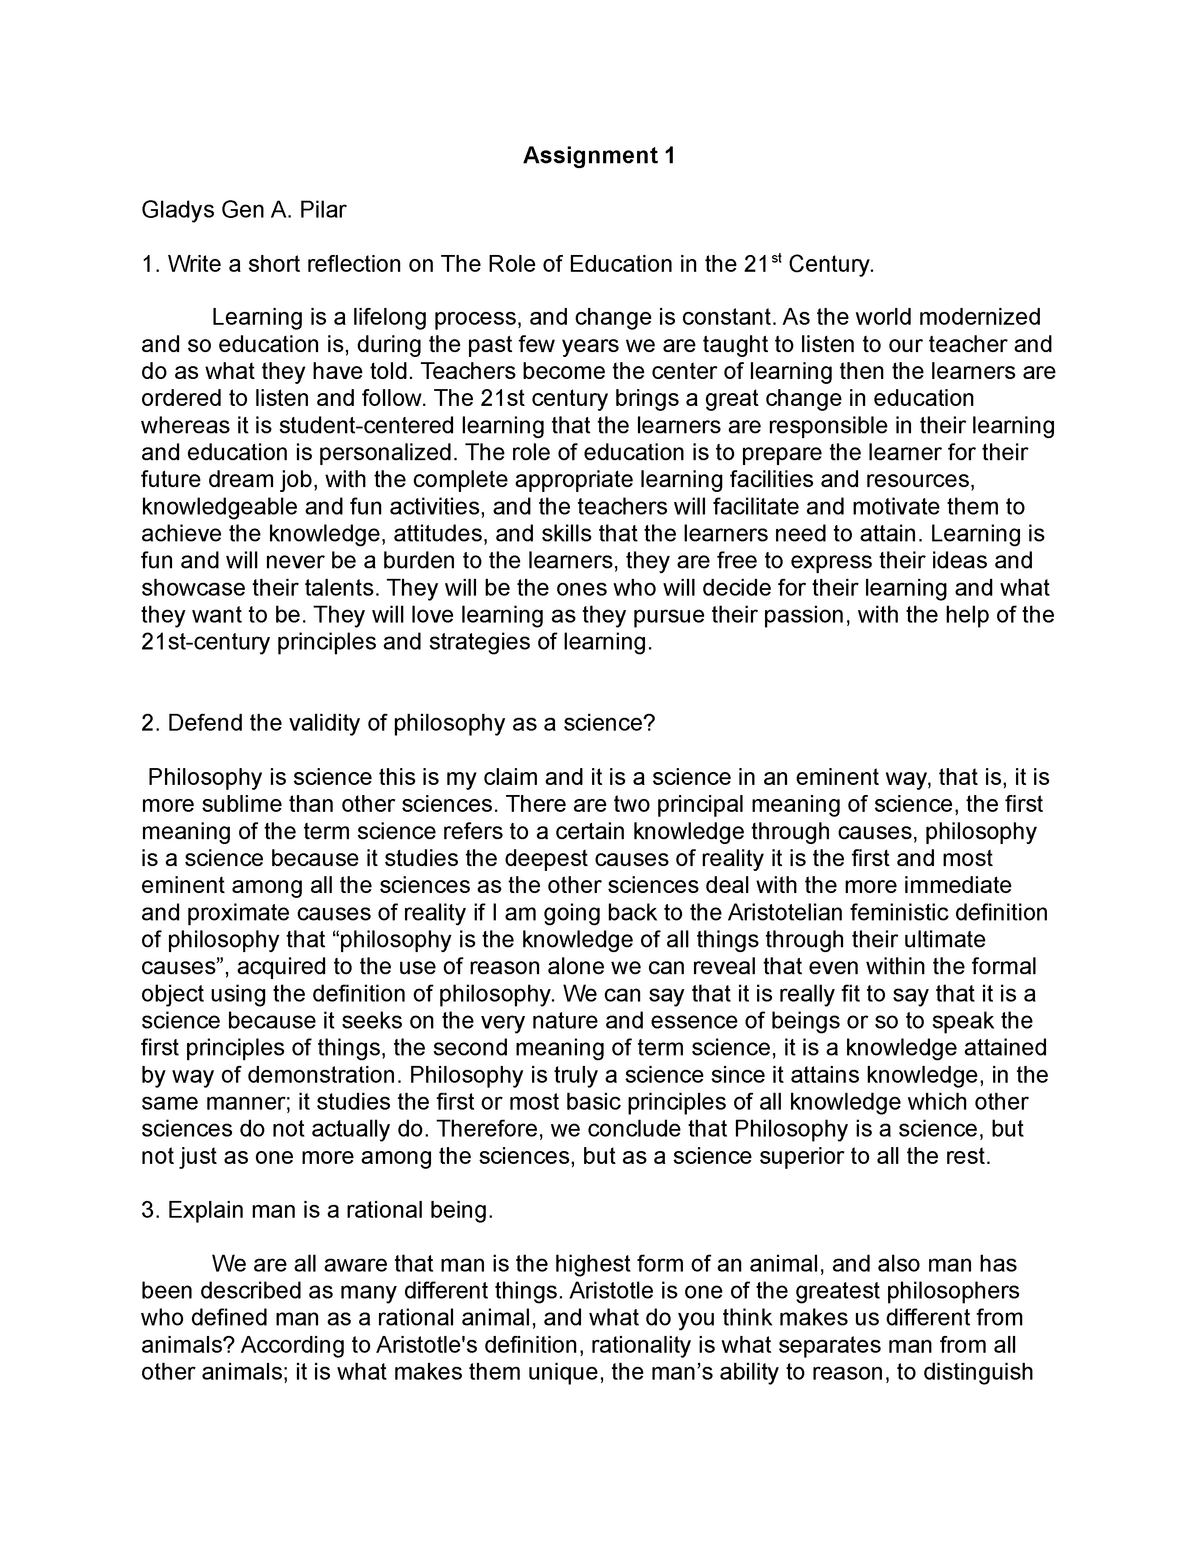 essay on importance of education in 21st century